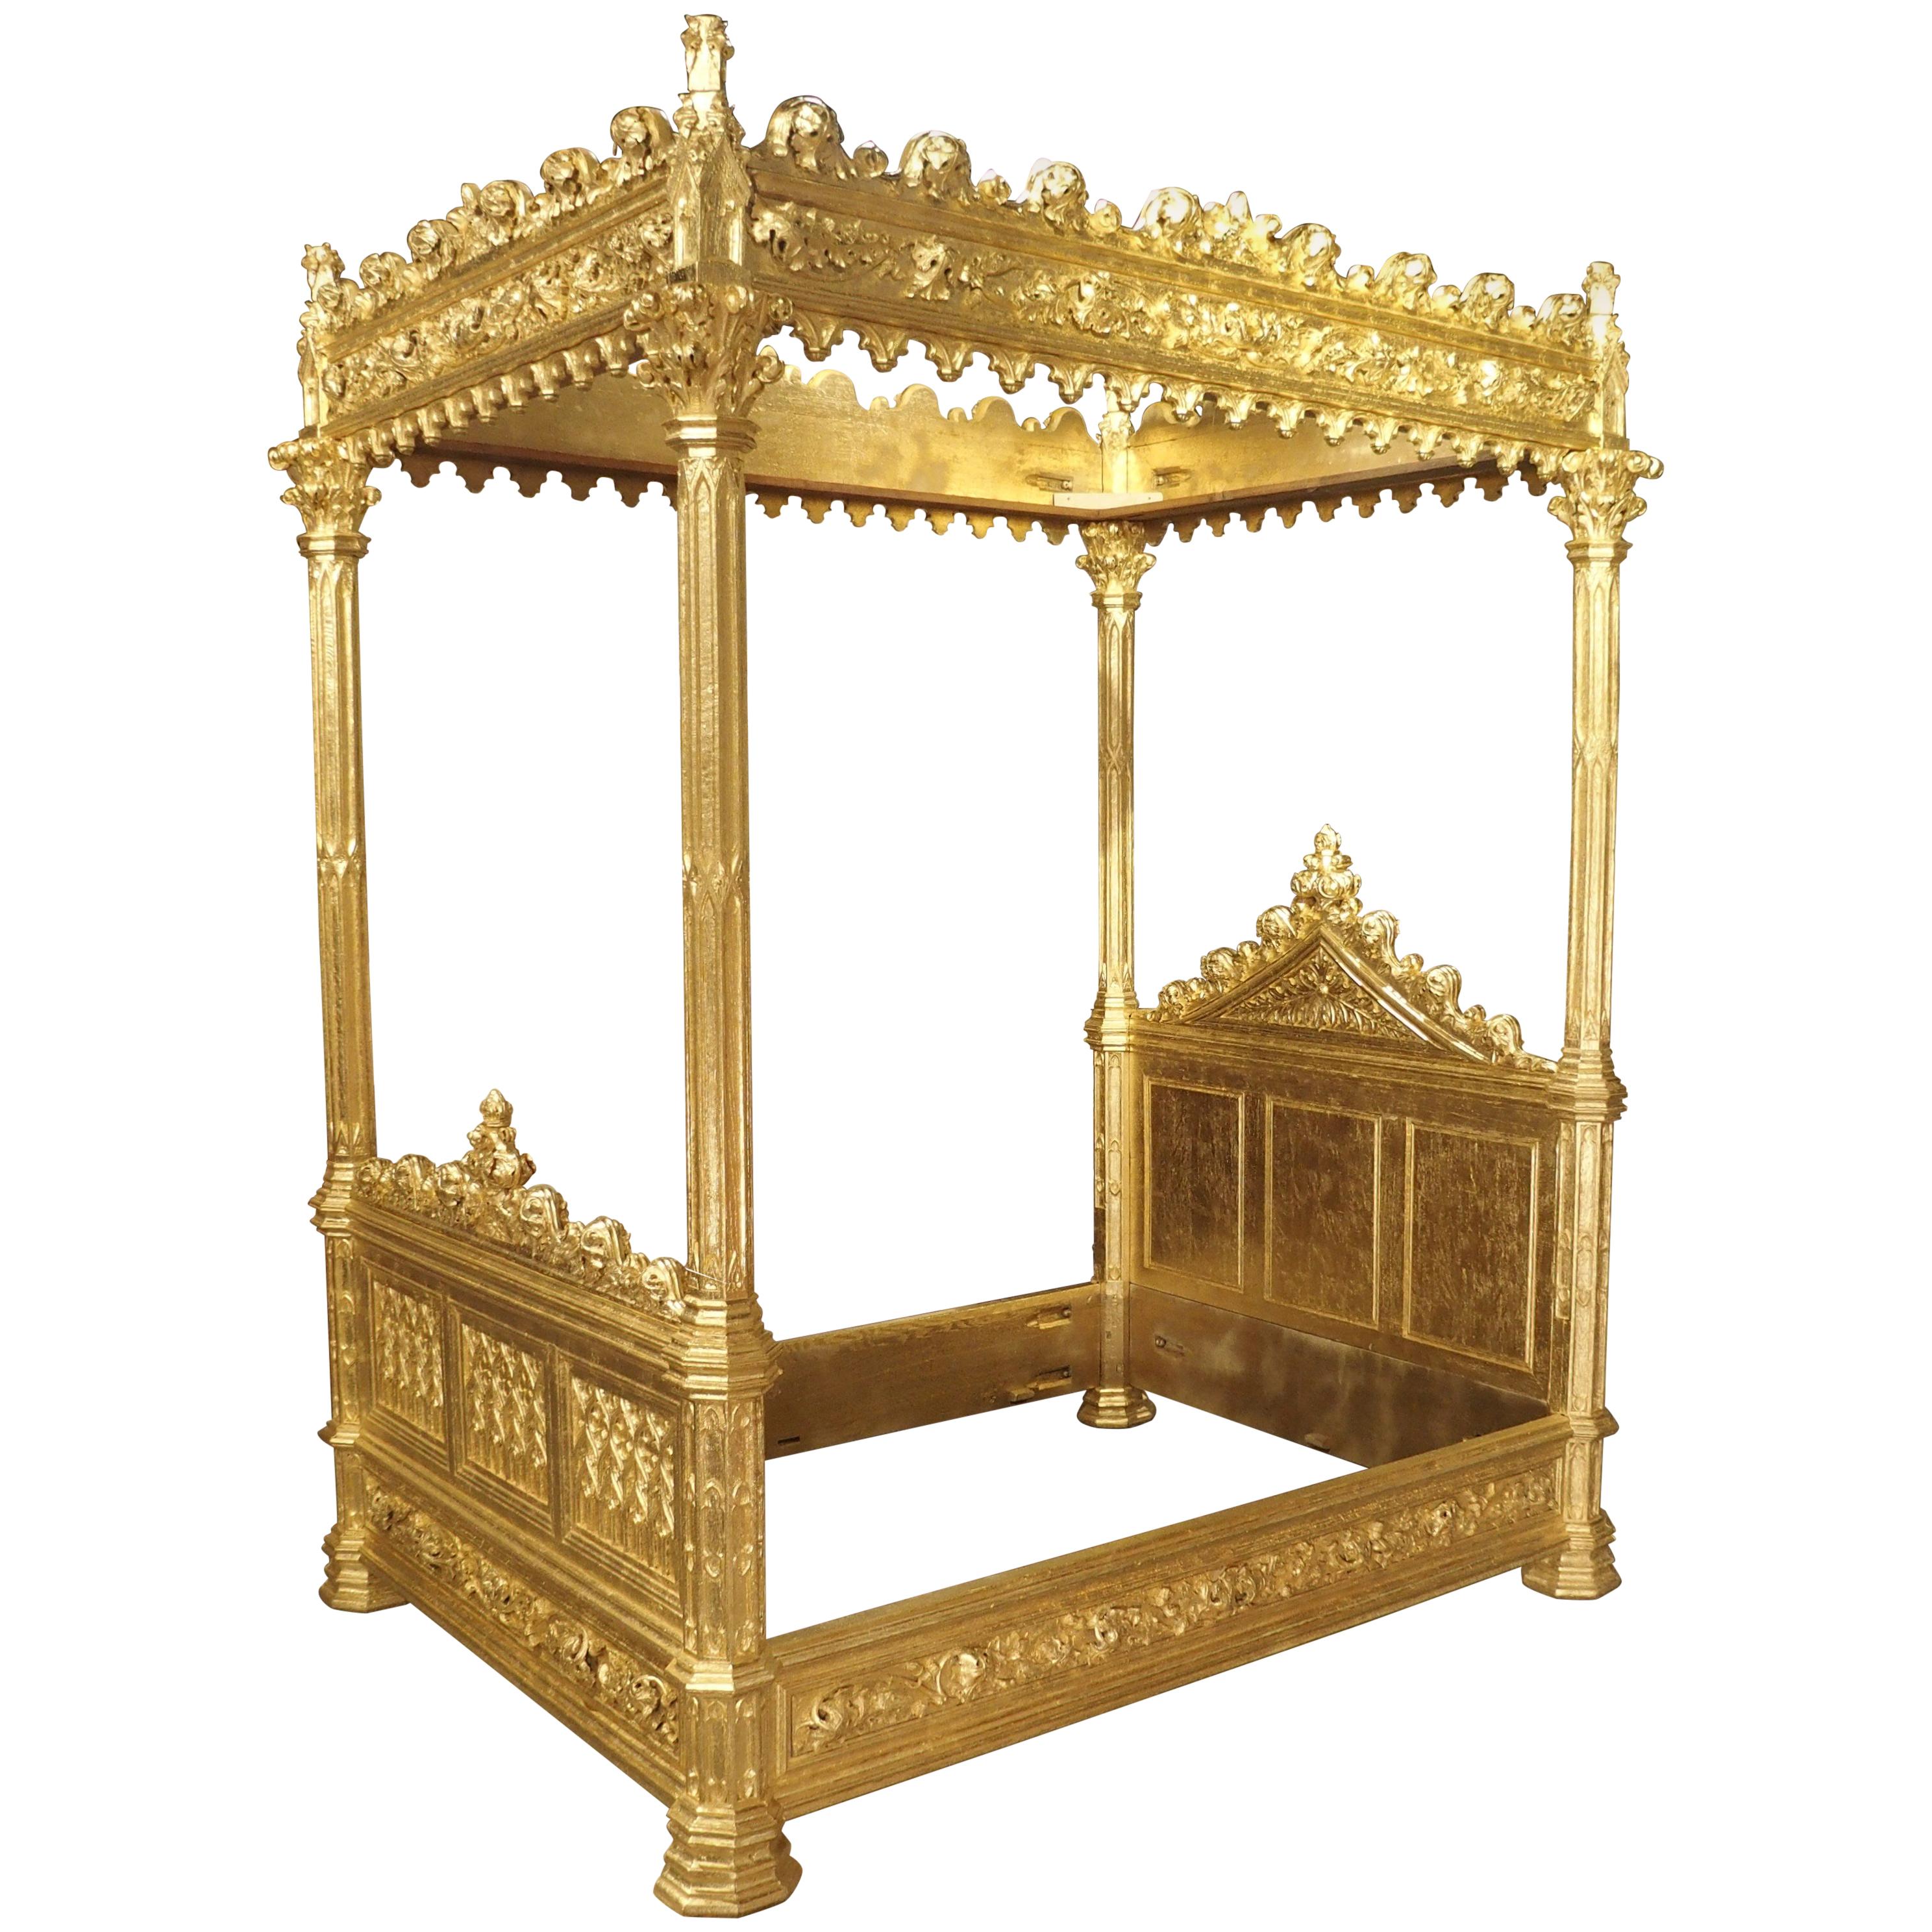 Magnificent Fully Carved Antique French Gothic Bed in 23.5-Karat Gold Leaf